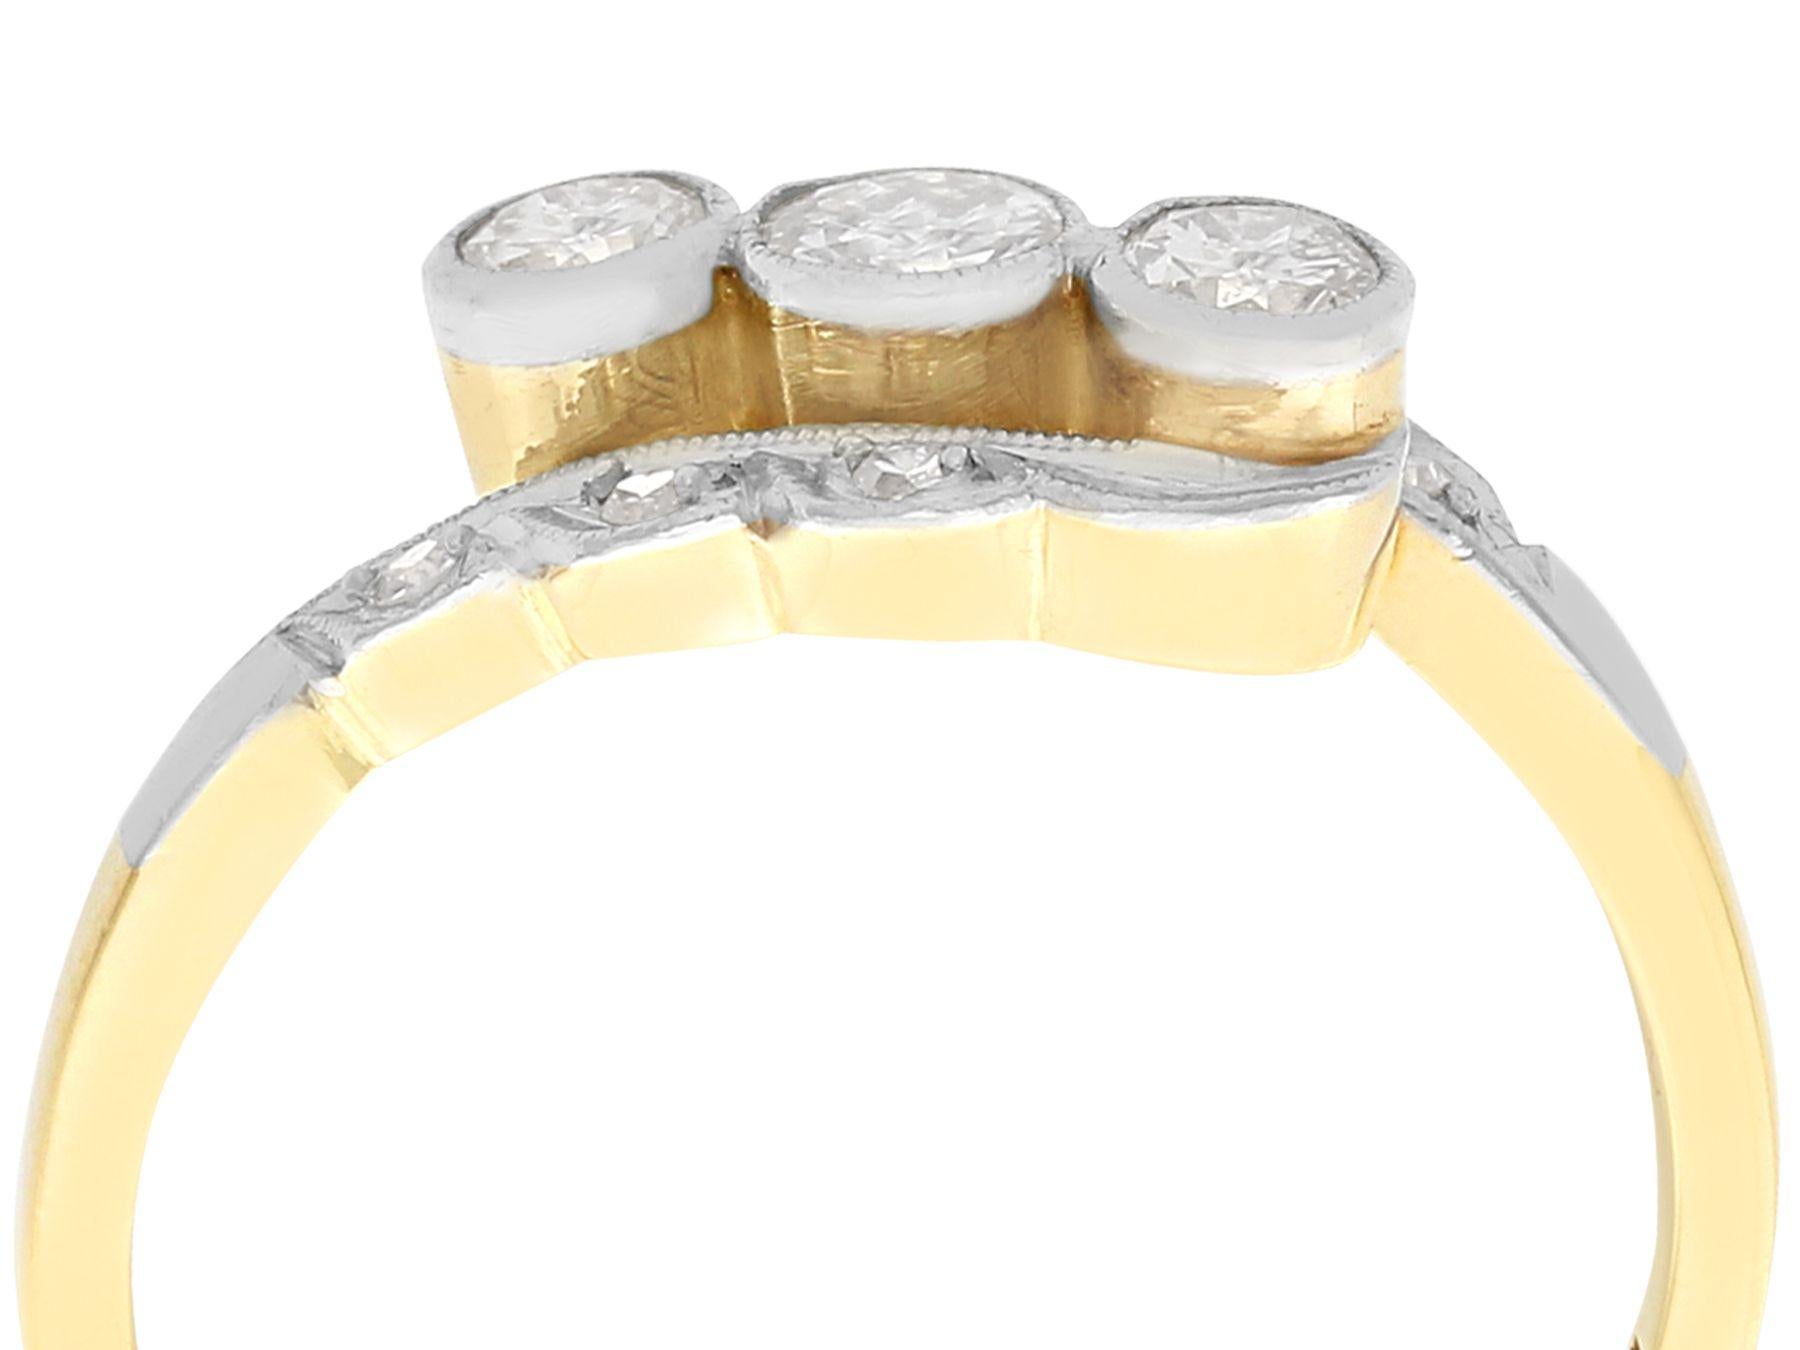 An impressive antique 0.39 carat diamond and 14 karat yellow gold and 14 karat white gold twist ring; part of our diverse antique jewelry and estate jewelry collections.

This fine and impressive three stone dress ring has been crafted in 14k yellow